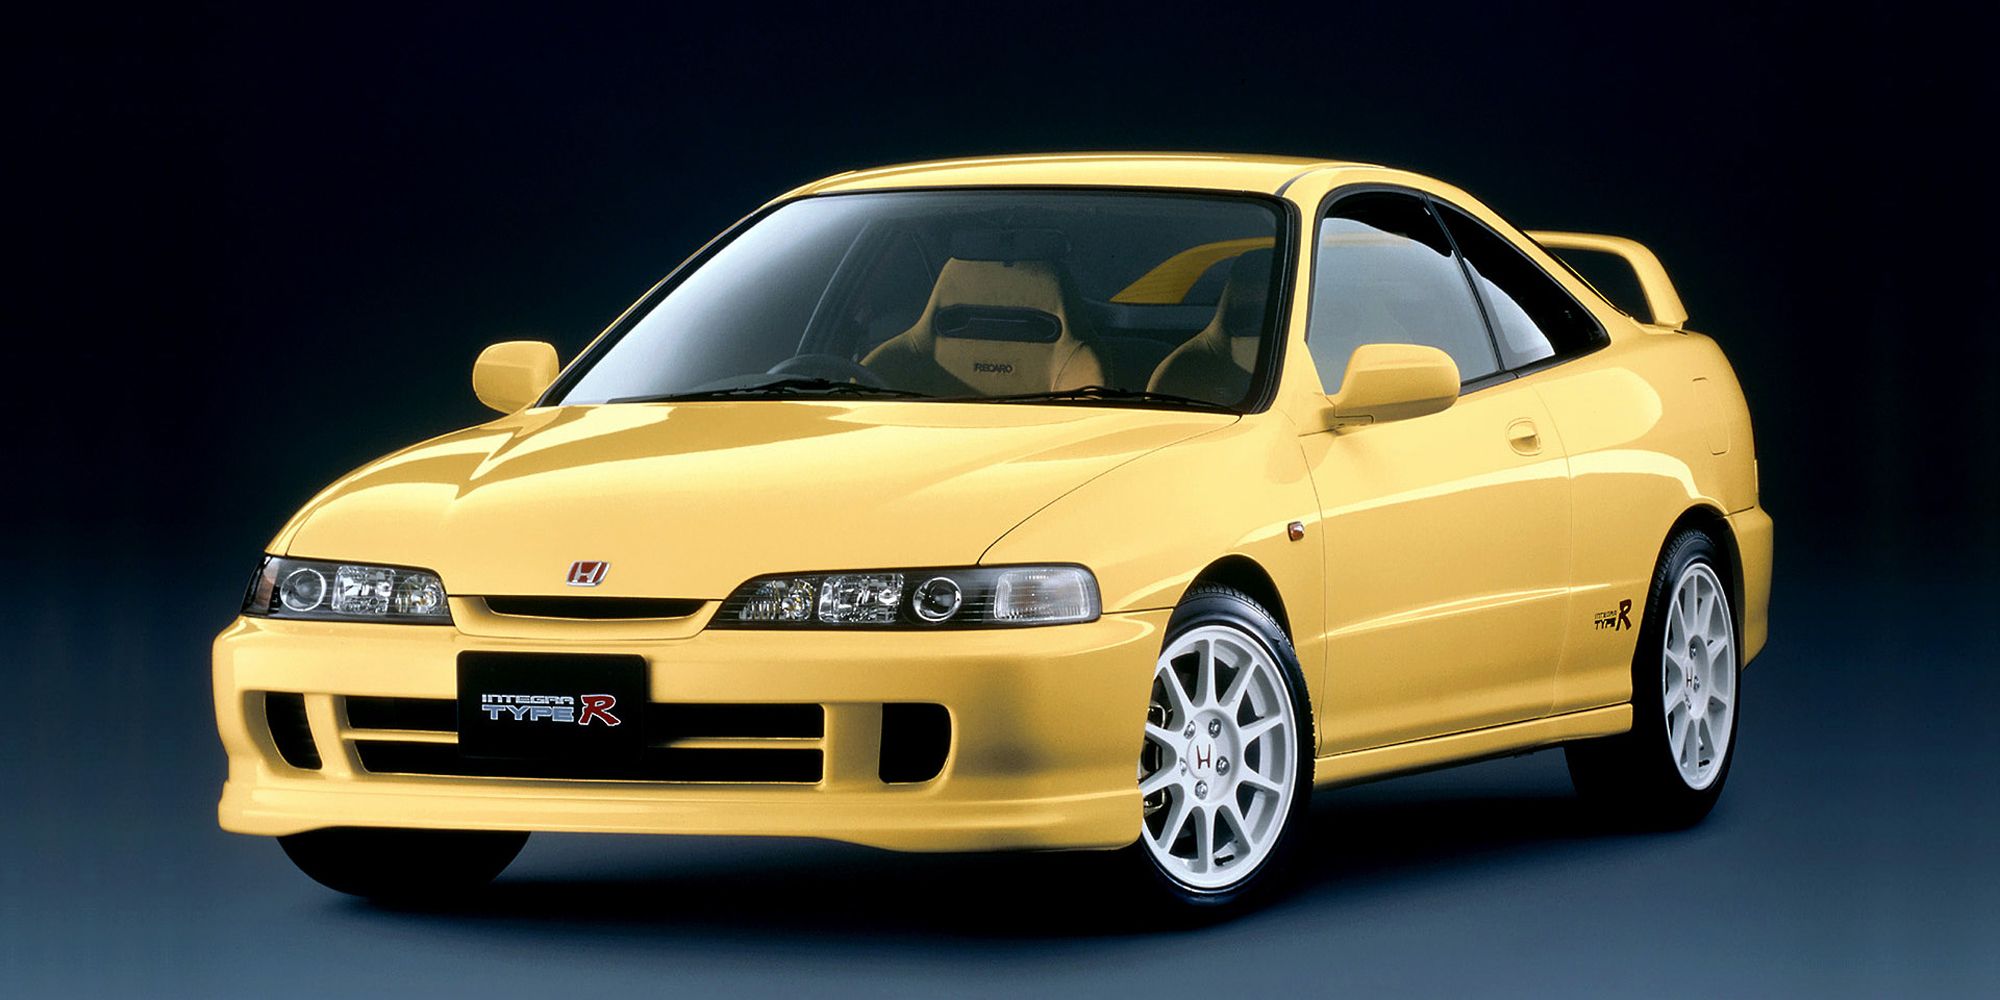 The front of the Integra Type R